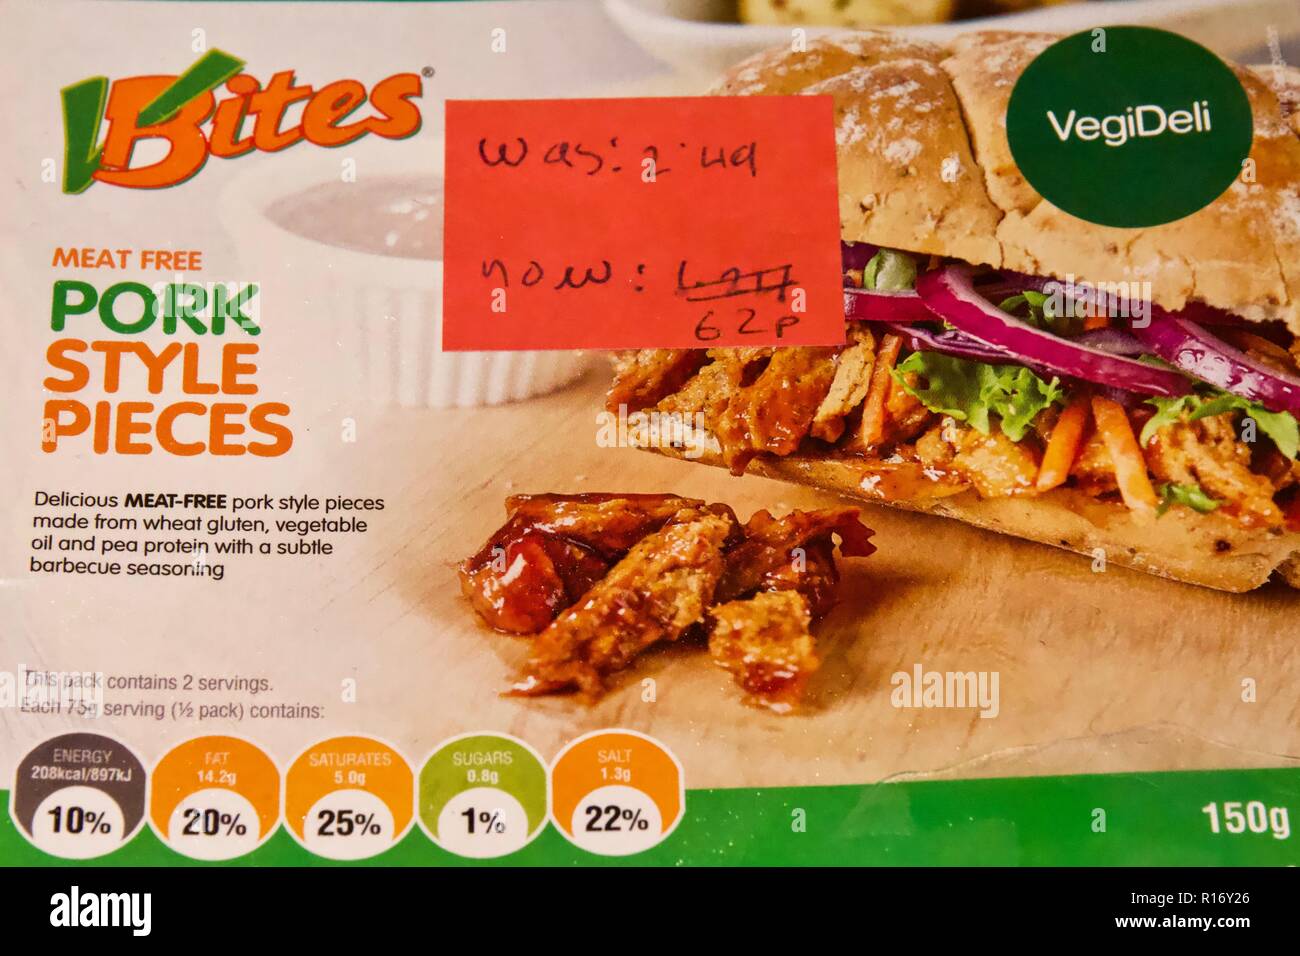 VBites Meat-free vegan Pork Style Pieces from Holland and Barrett, with a reduced price label on it Stock Photo